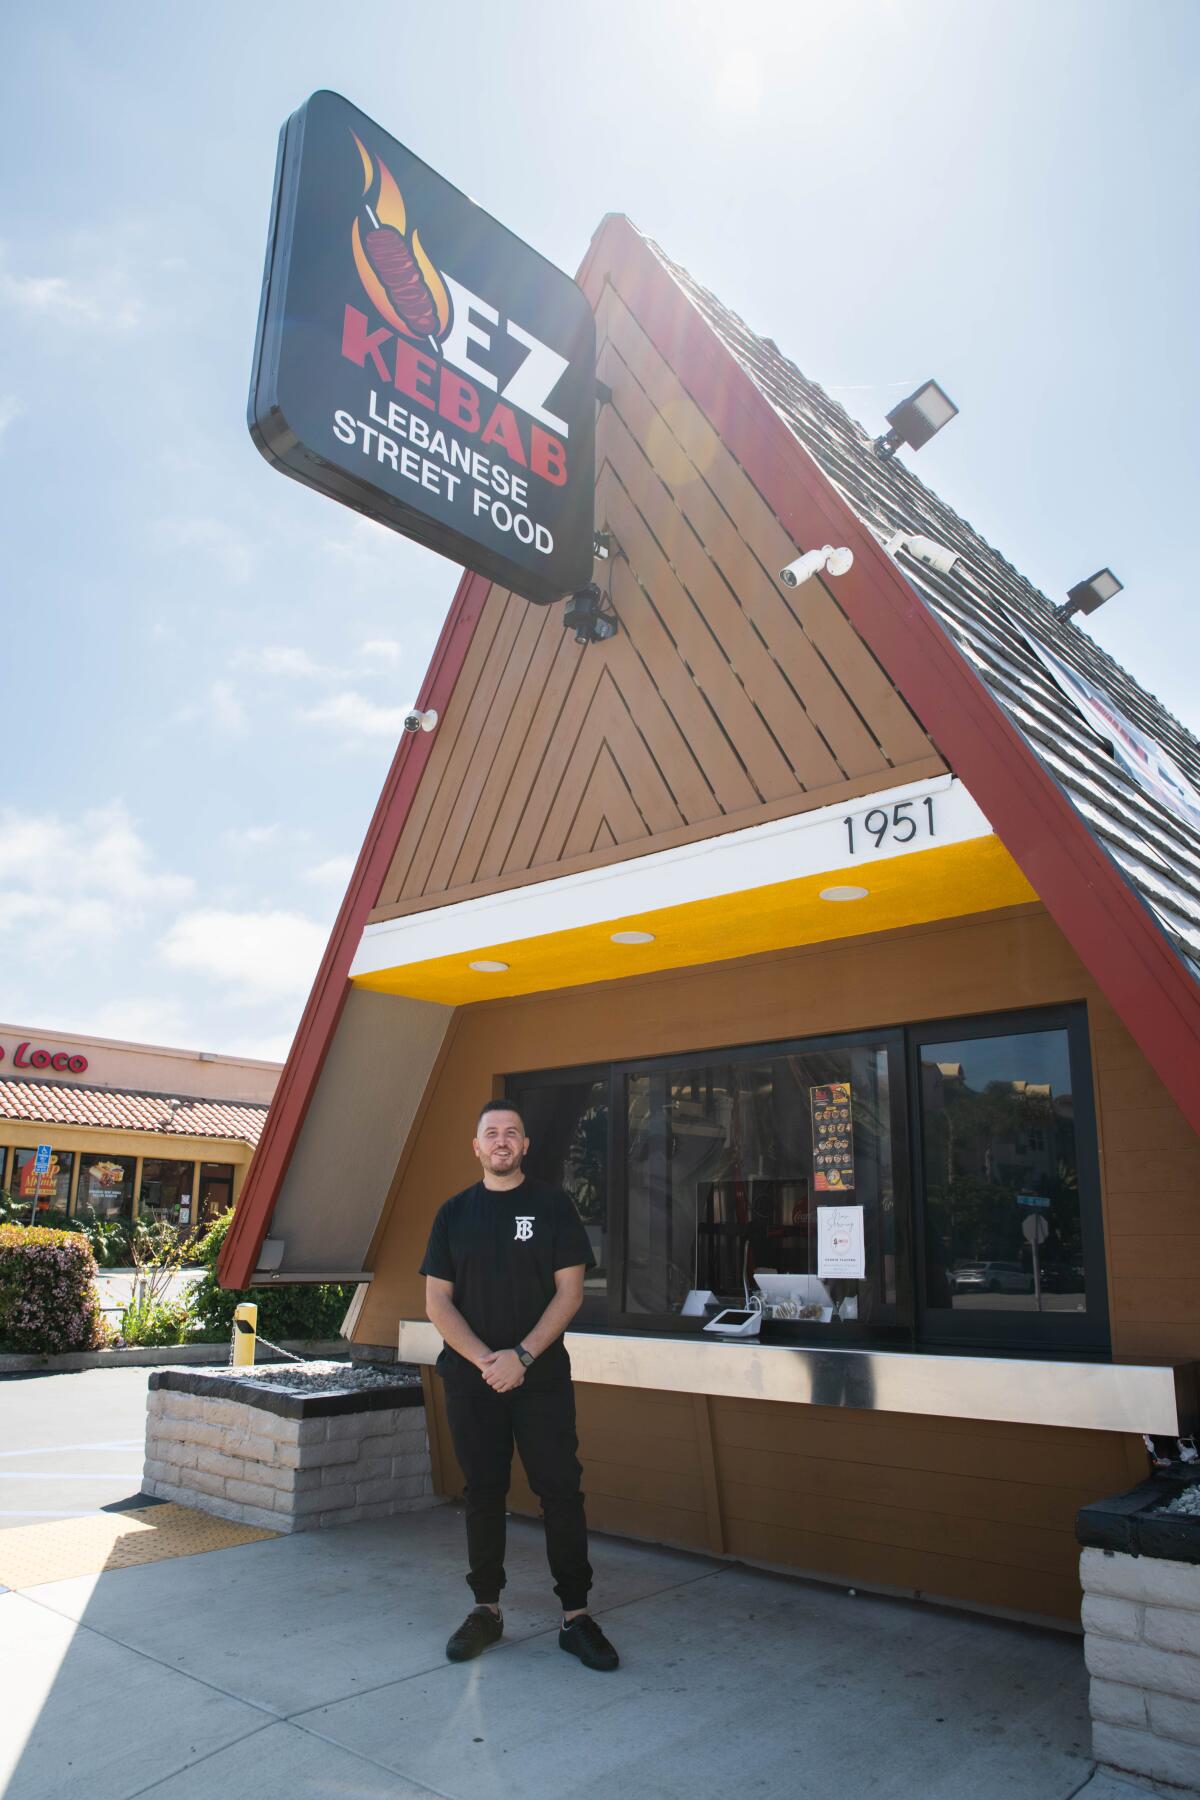 EZ Kebab opens in Costa Mesa’s iconic A-frame building off Harbor Boulevard.